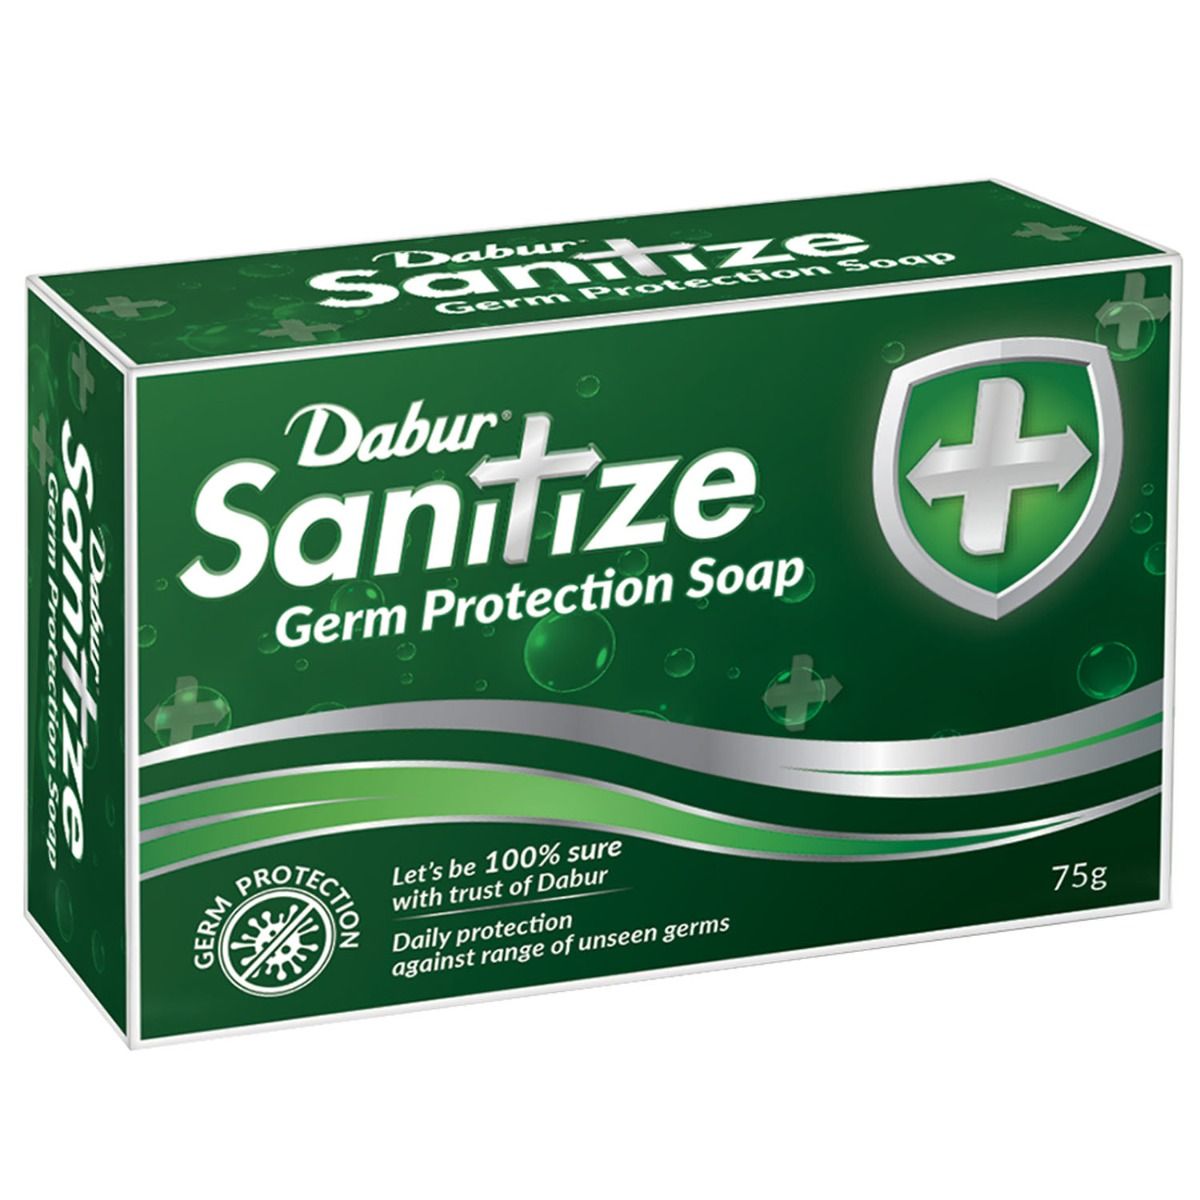 Dabur Sanitize Germ Protection Soap, 75 gm, Pack of 1 